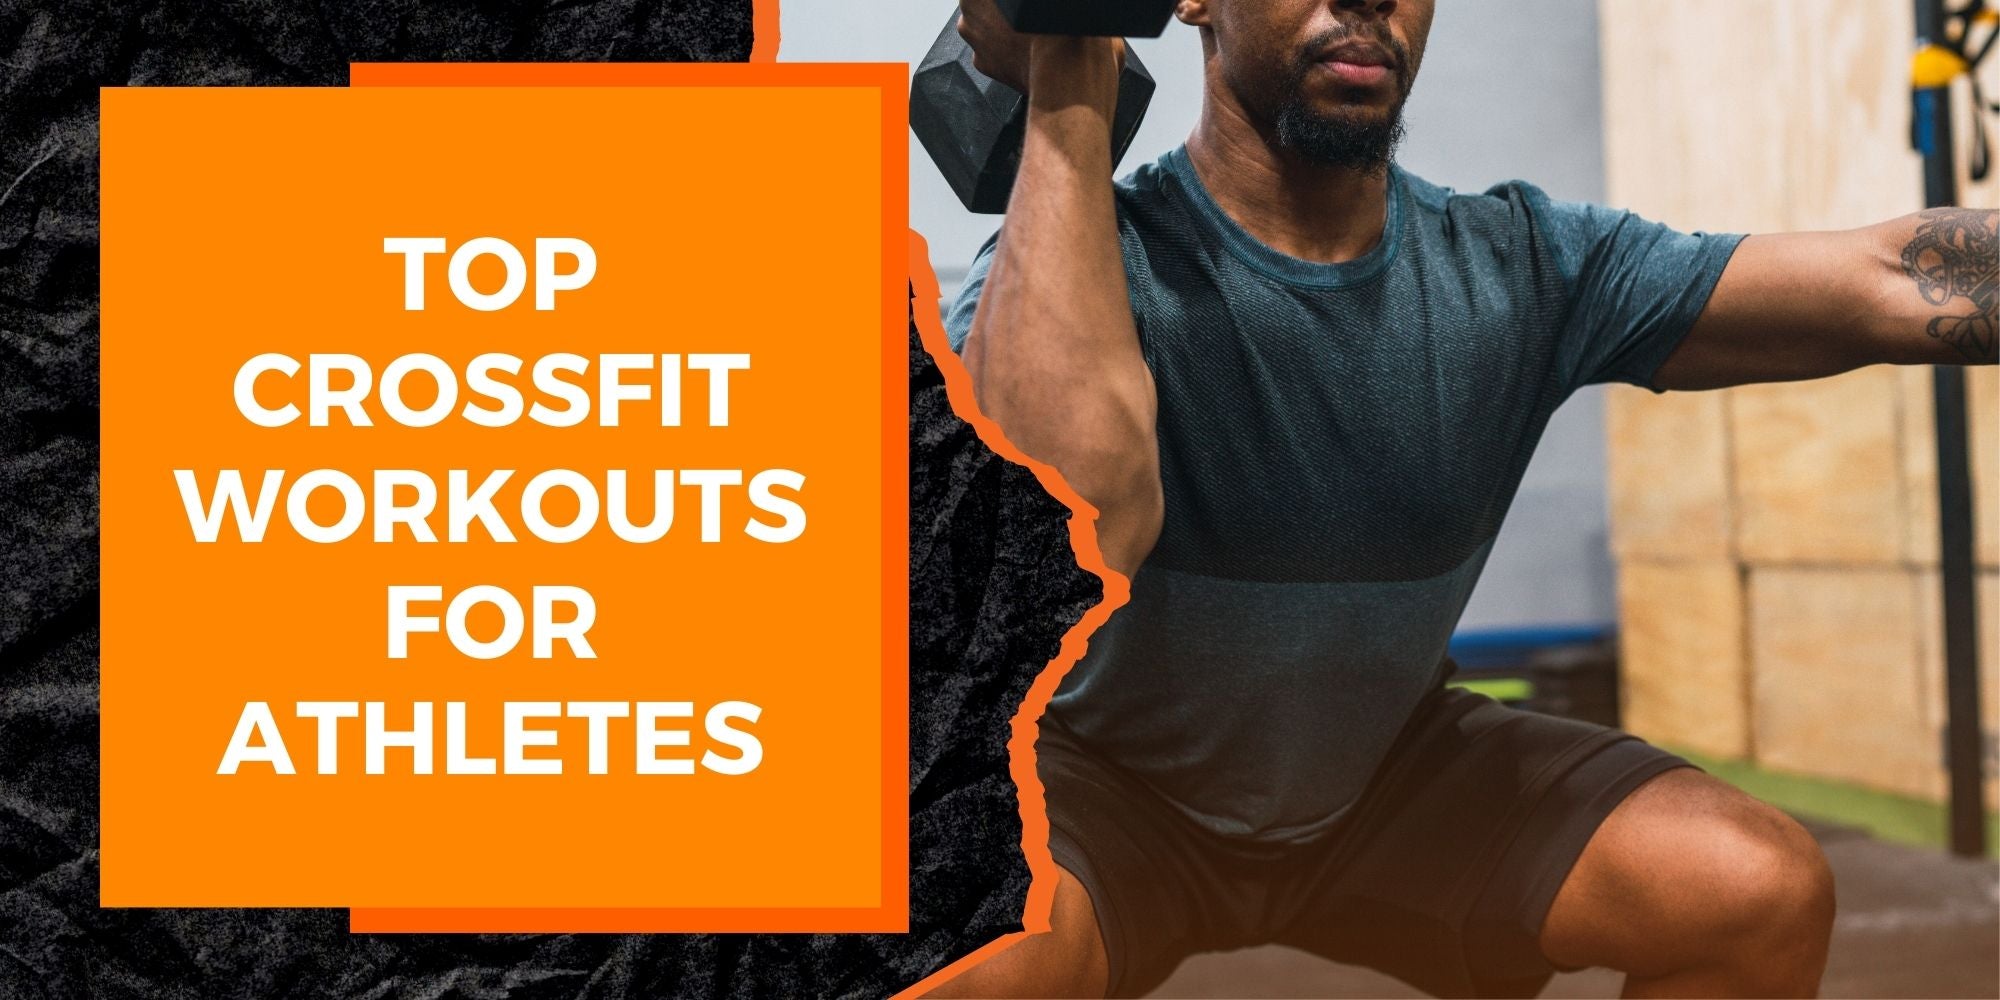 The Top CrossFit Workouts for Athletes